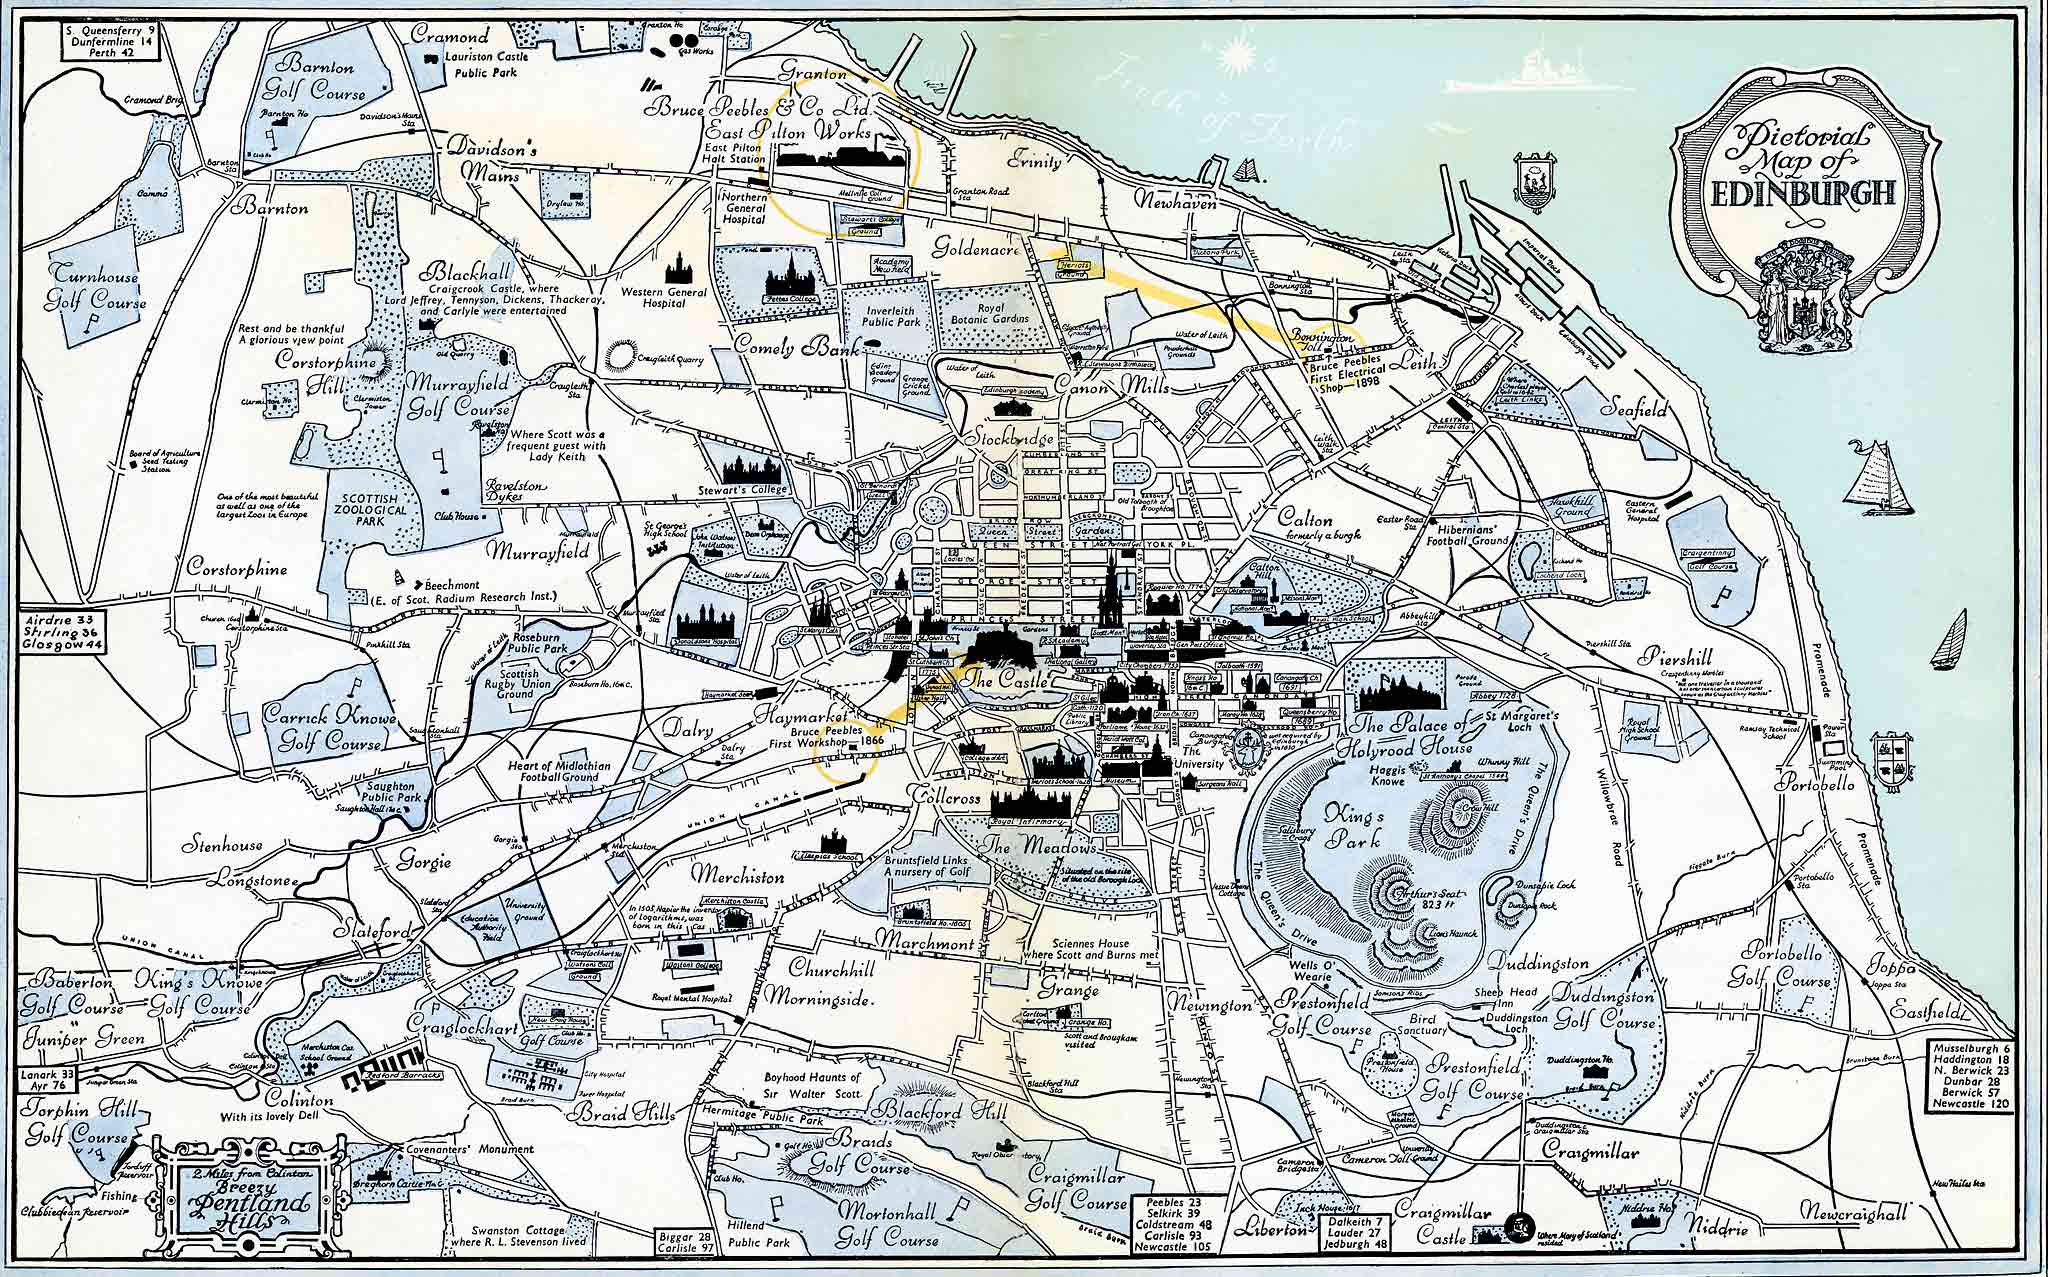 Pictorial Map of Edinburgh showing Bruce Peebles' works from 1866 until 1954